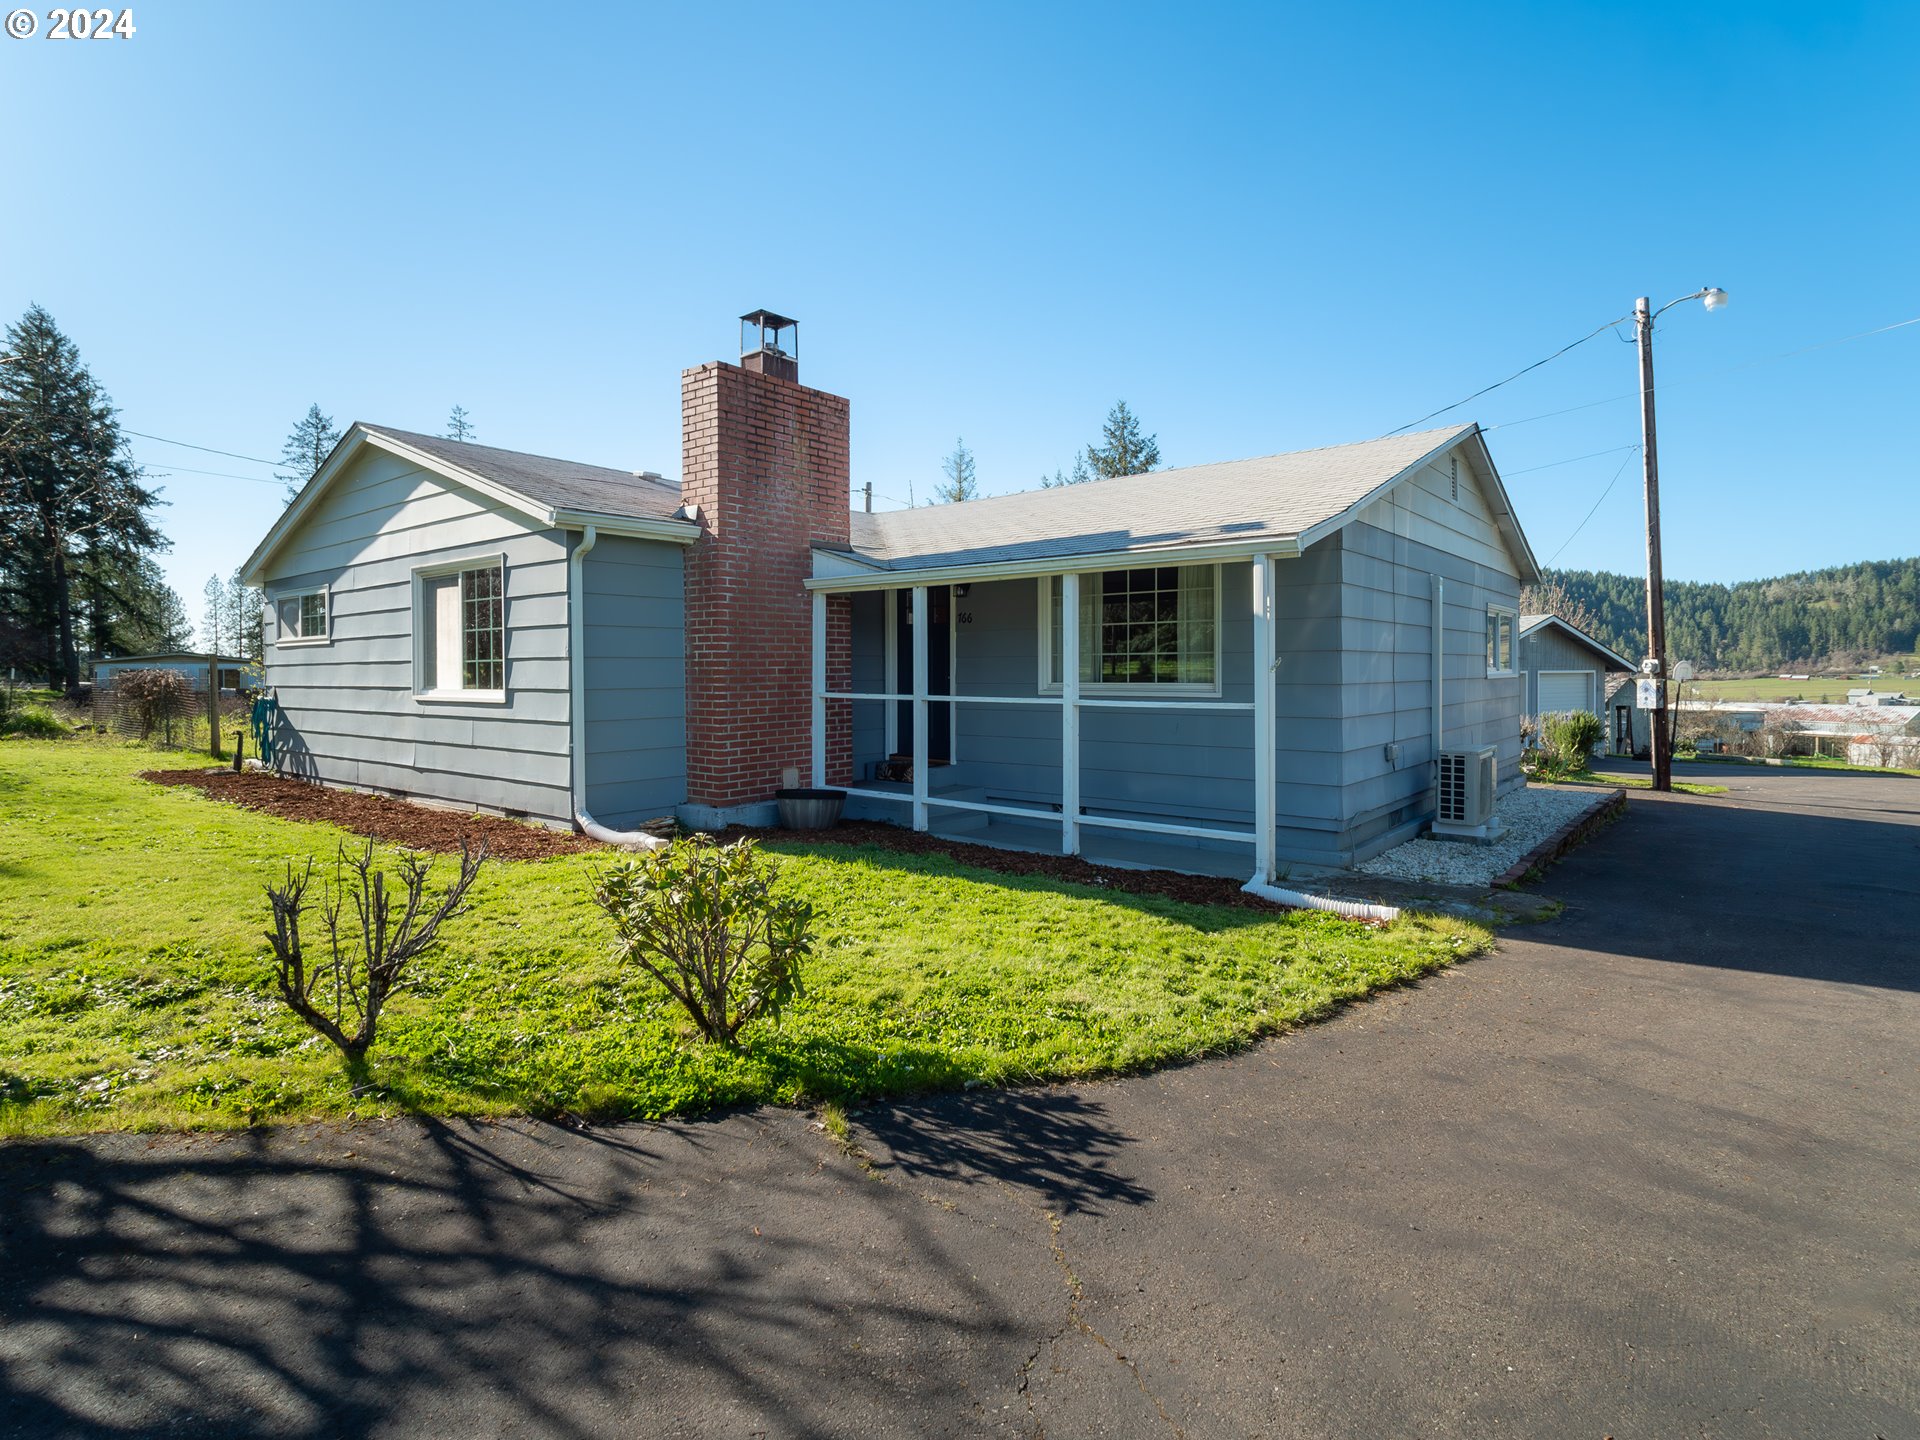 766 VALLEY VIEW RD, Sutherlin, OR 